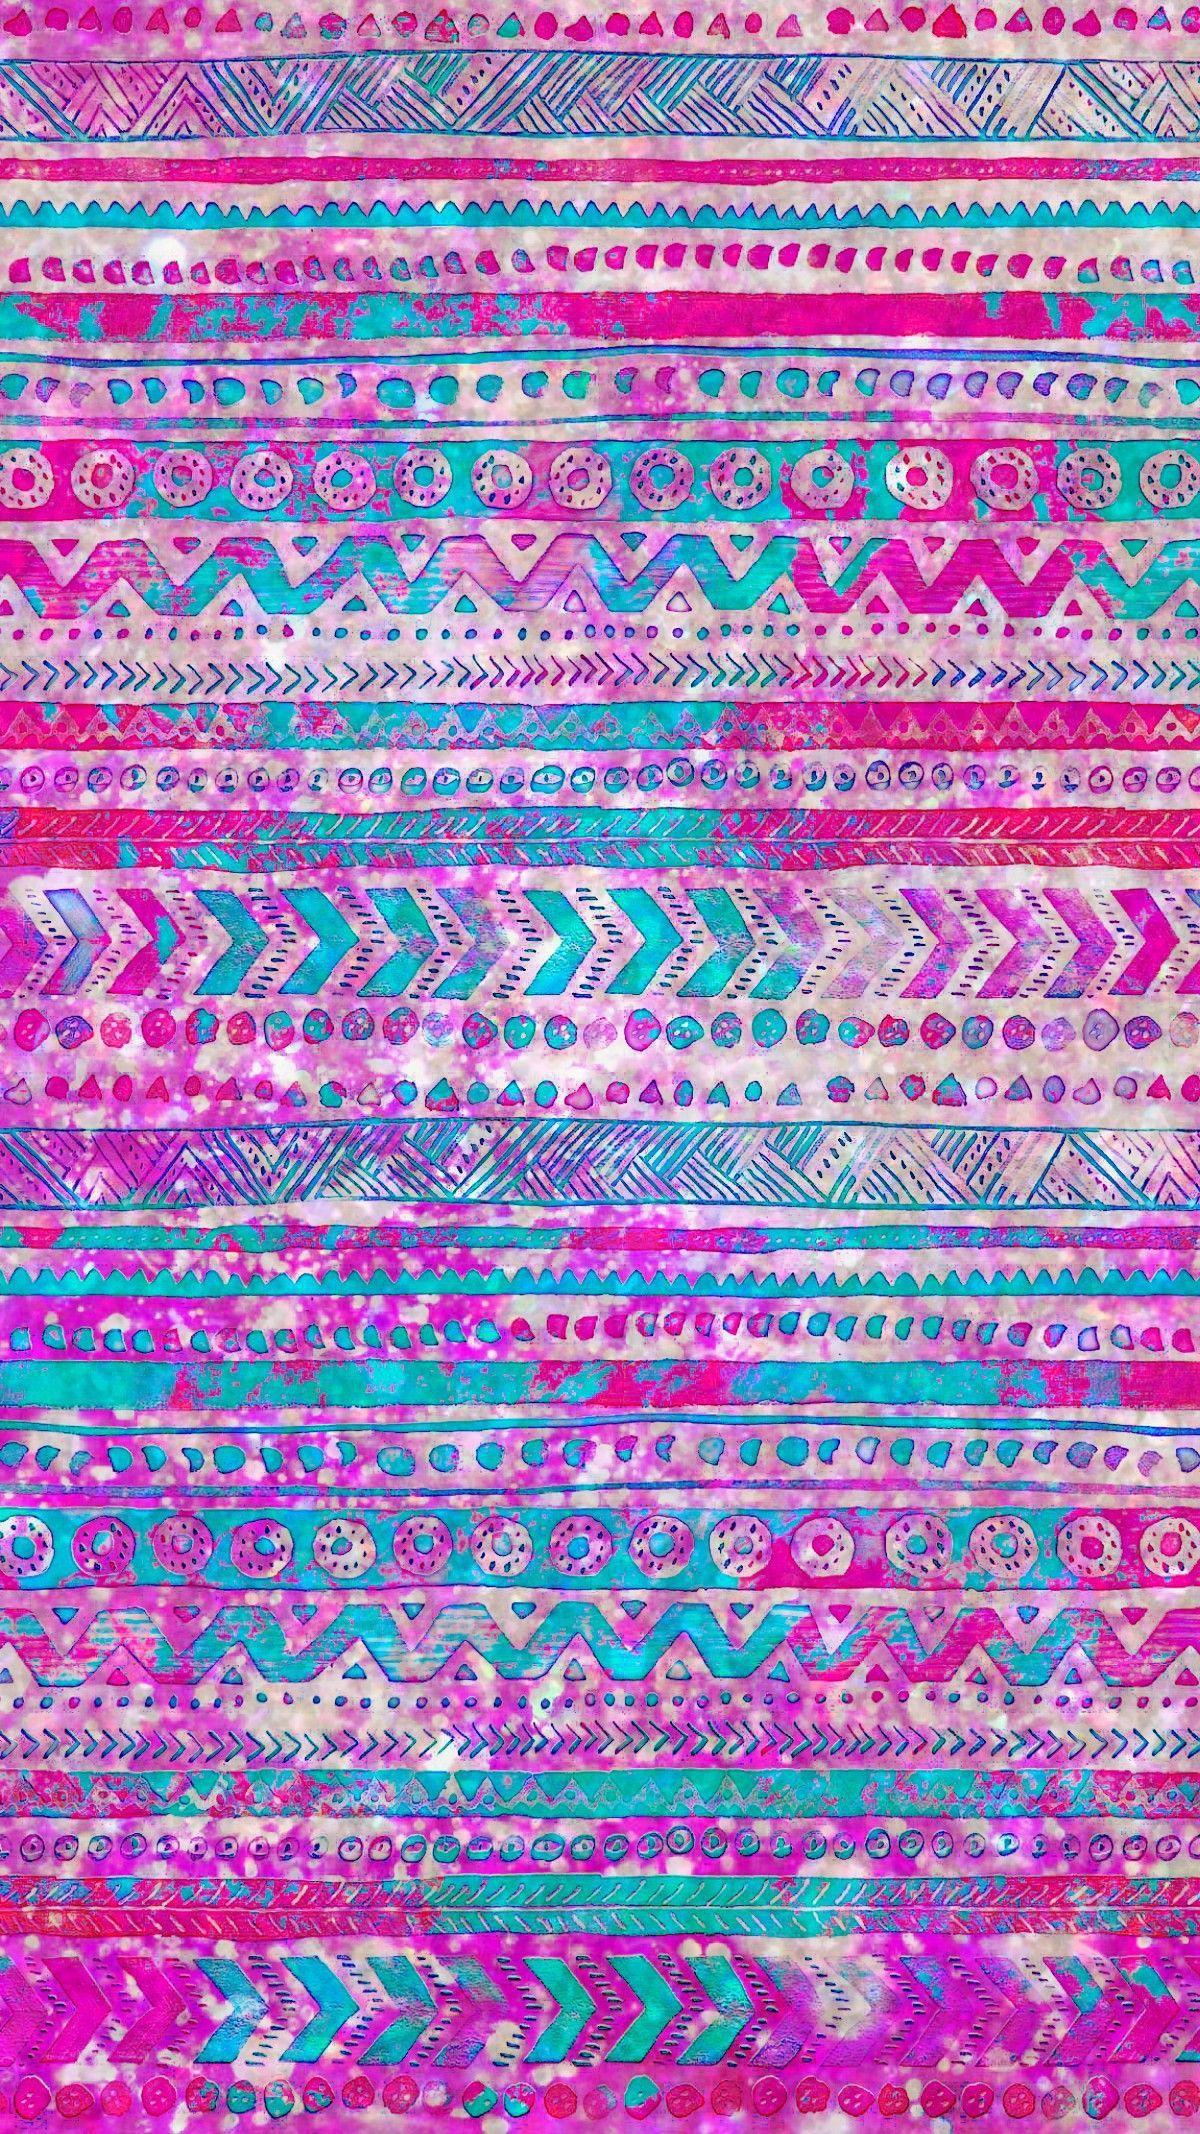 Sparkly Blue and Pink Tribal, made by me #patterns #blue #glitter